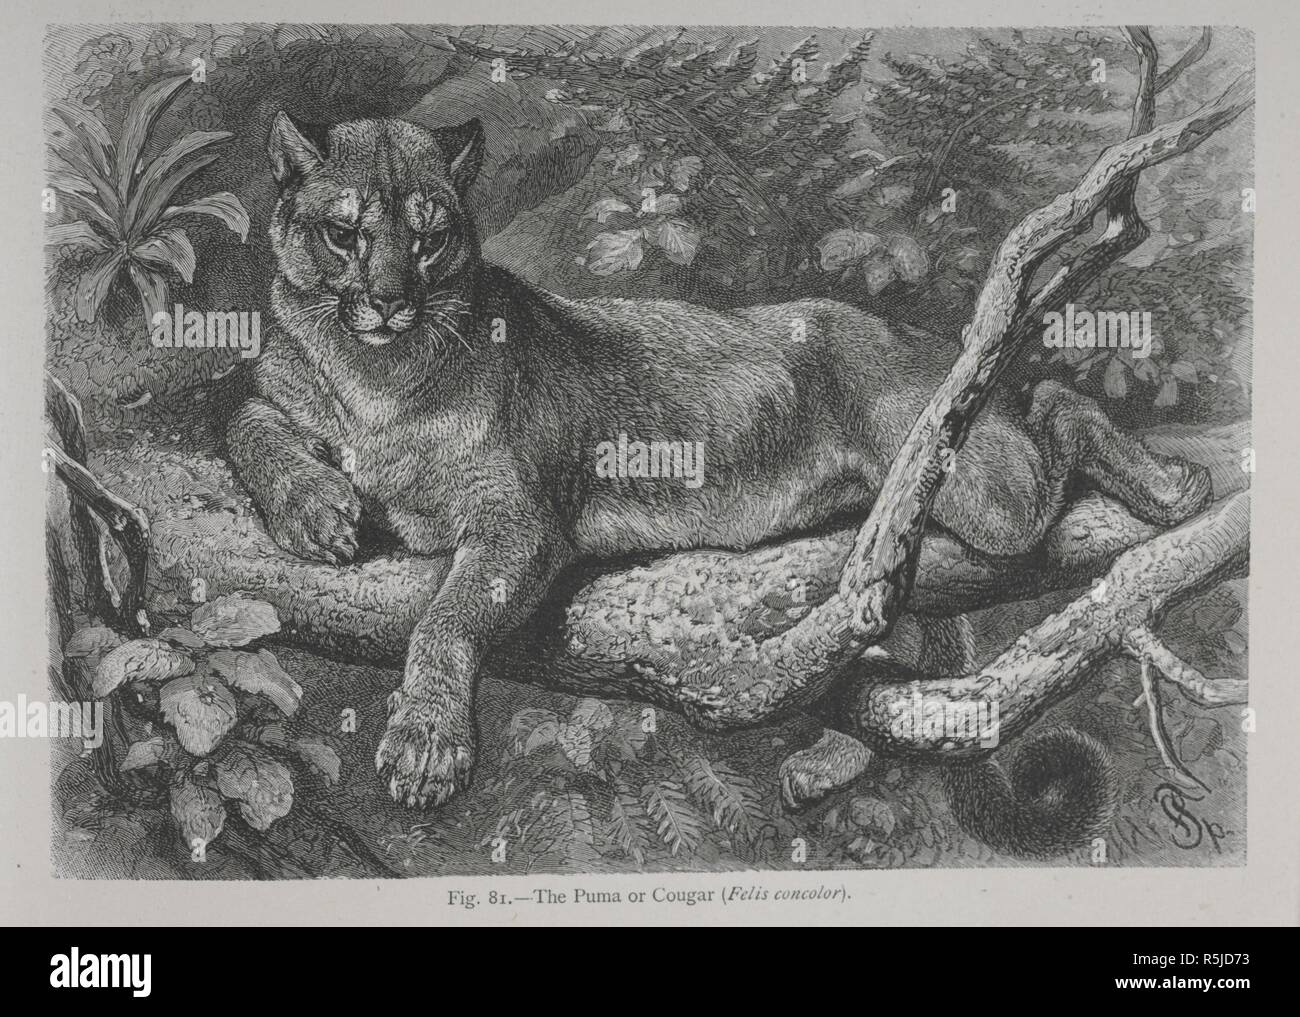 The Puma or Cougar. The Geographical Distribution of Animals, with a study of the relations of living and extinct faunas as elucidating the past changes of the earth's surface. ... . London, 1876. Source: 07209.dd.1 fig.81. Author: WALLACE, ALFRED RUSSEL. Stock Photo